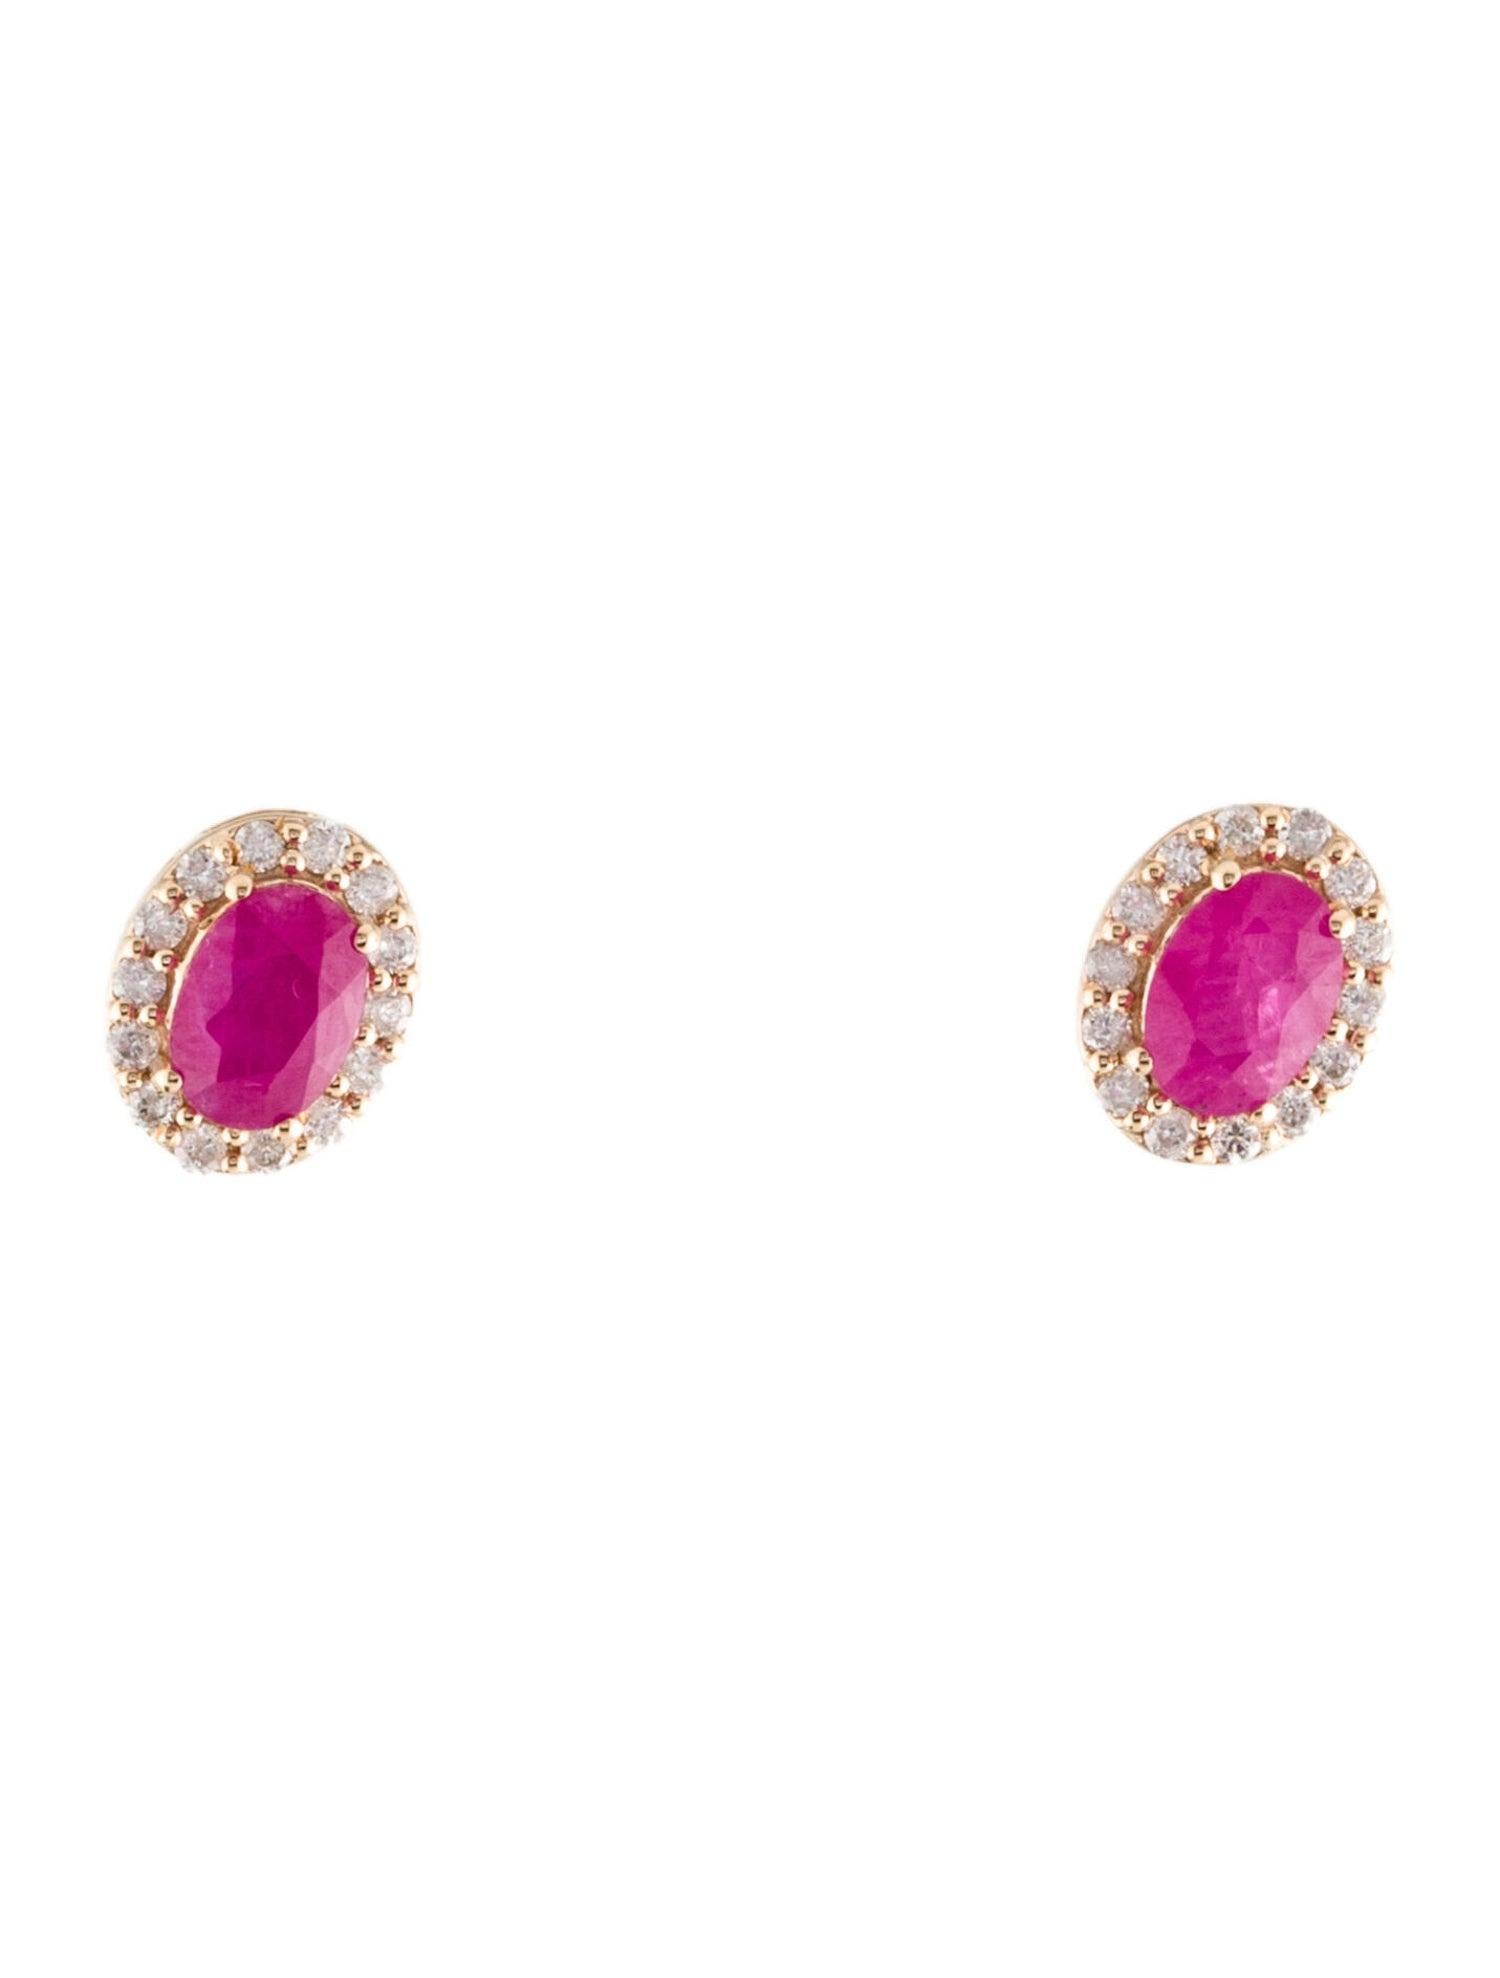 14K Ruby & Diamond Stud Earrings - Elegant Gemstone Jewelry, Timeless Sparkle In New Condition For Sale In Holtsville, NY